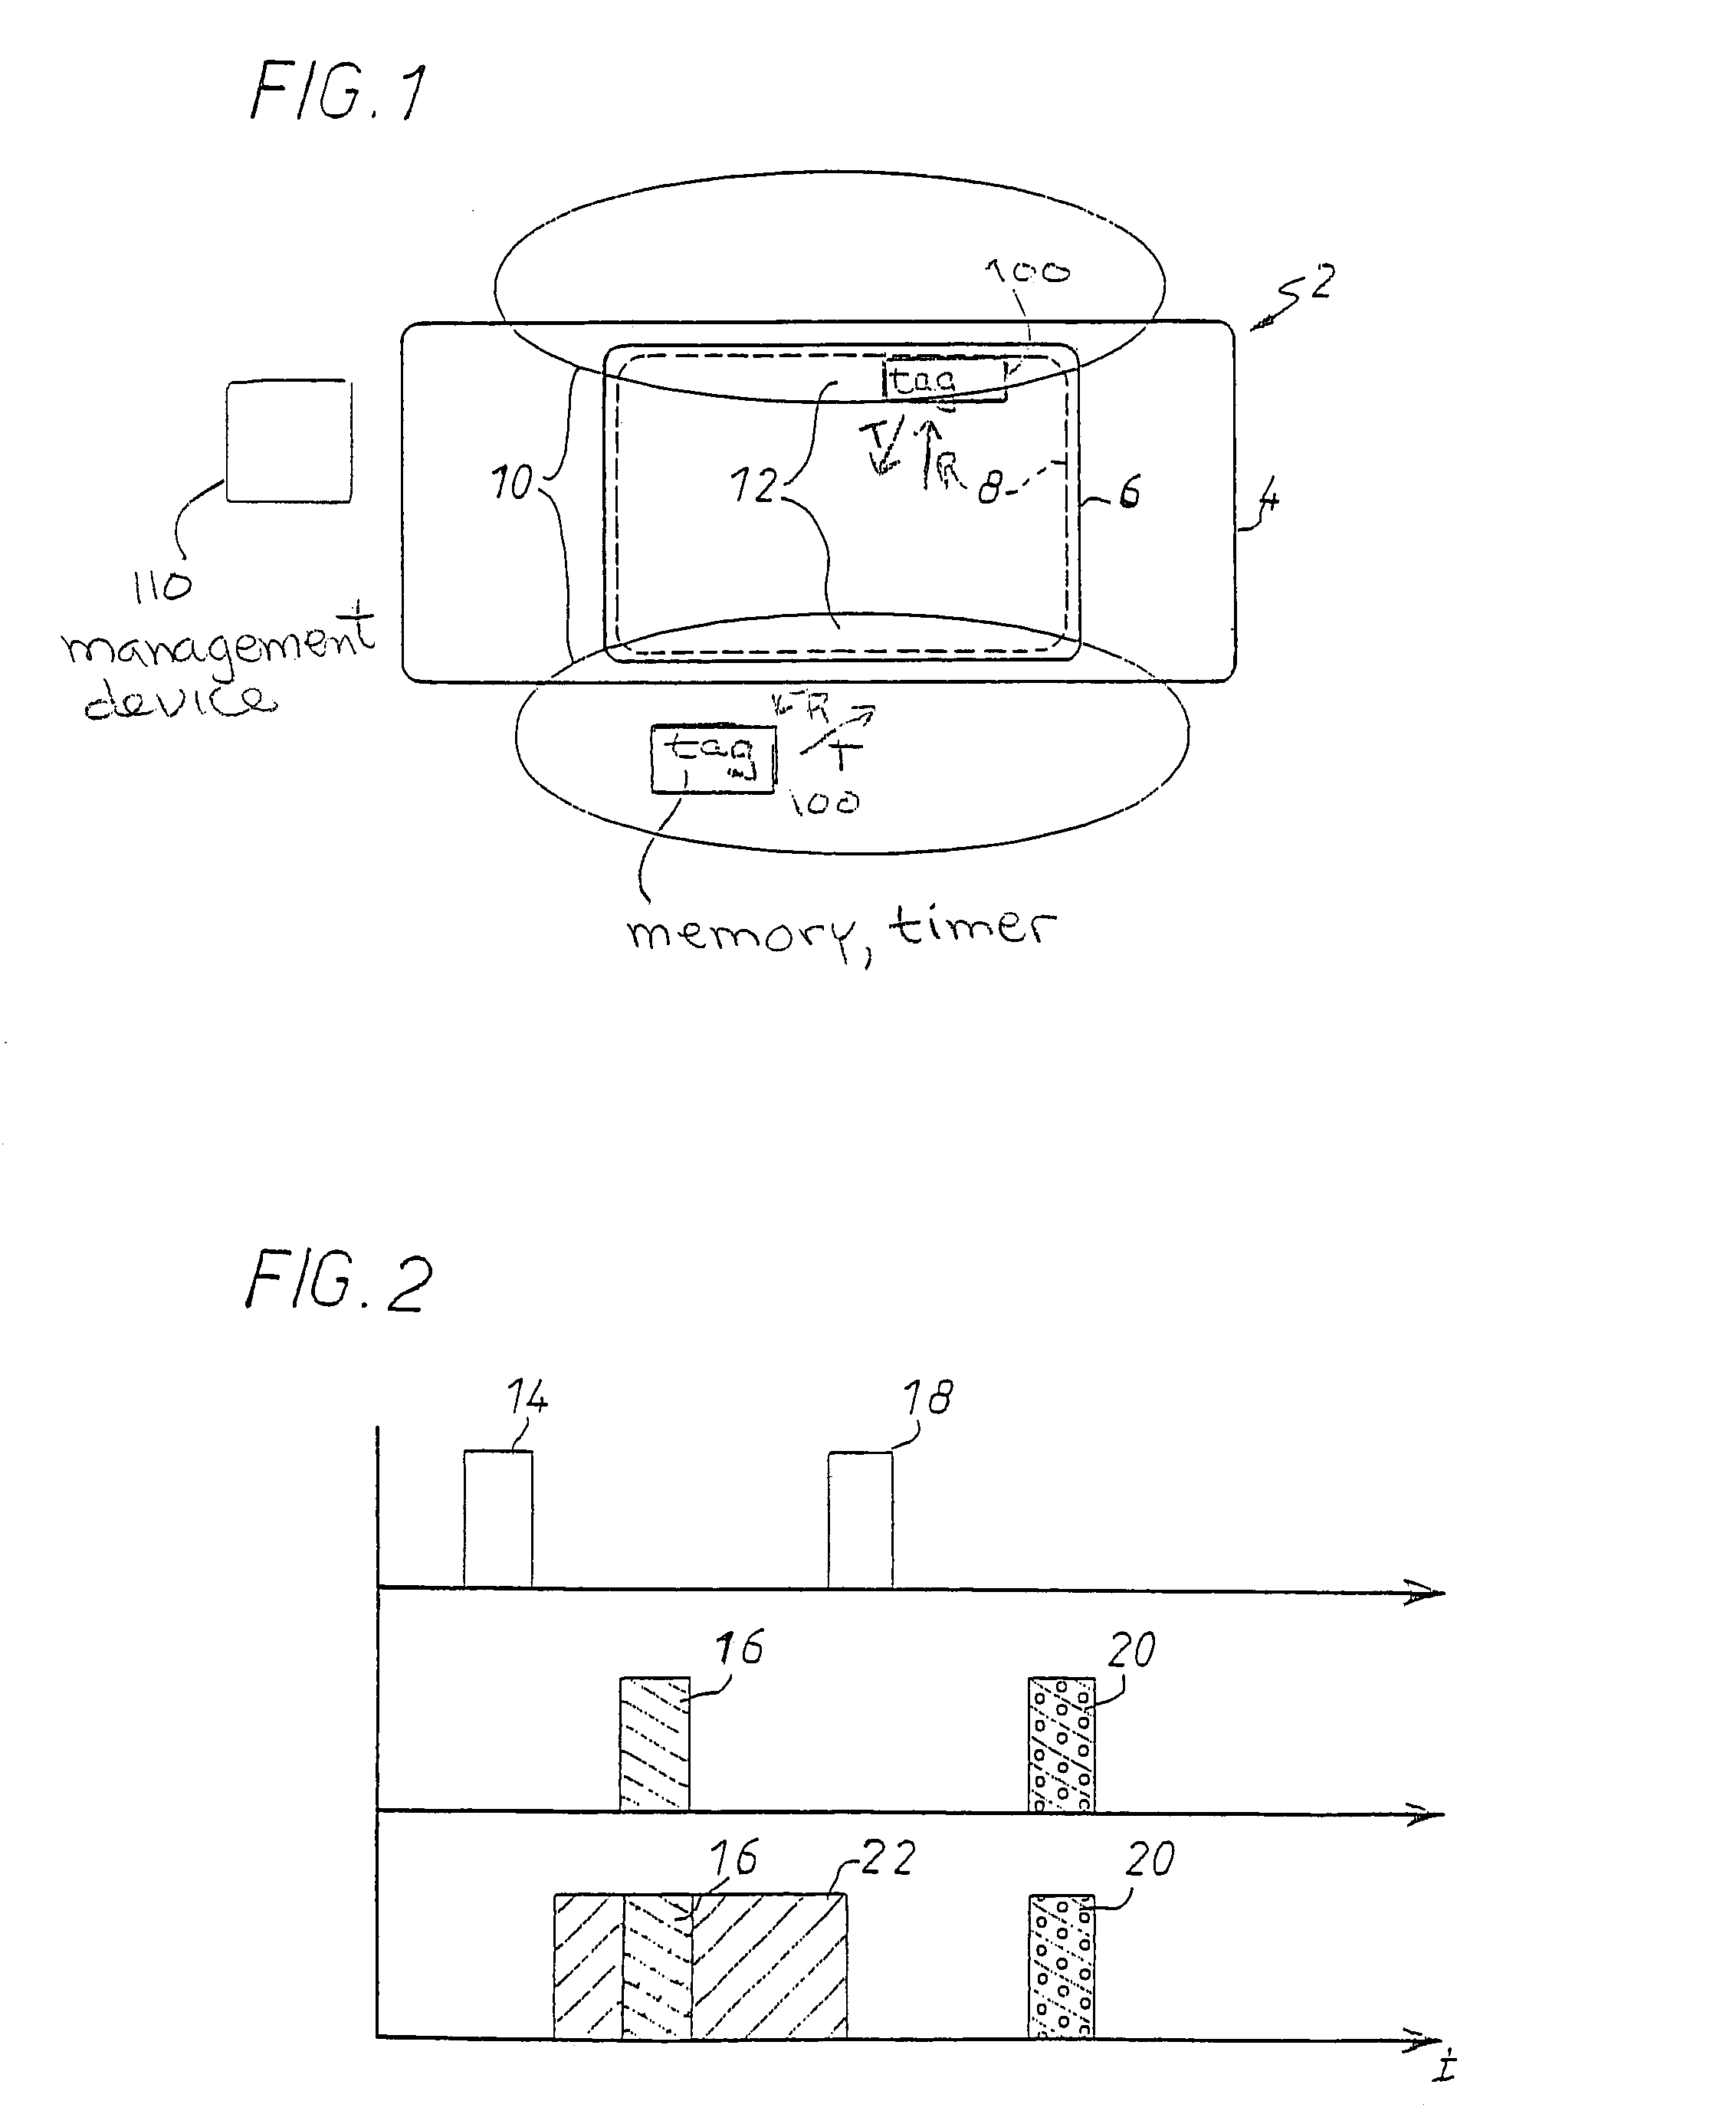 Method for locating a badge for a motor vehicle hands-free system